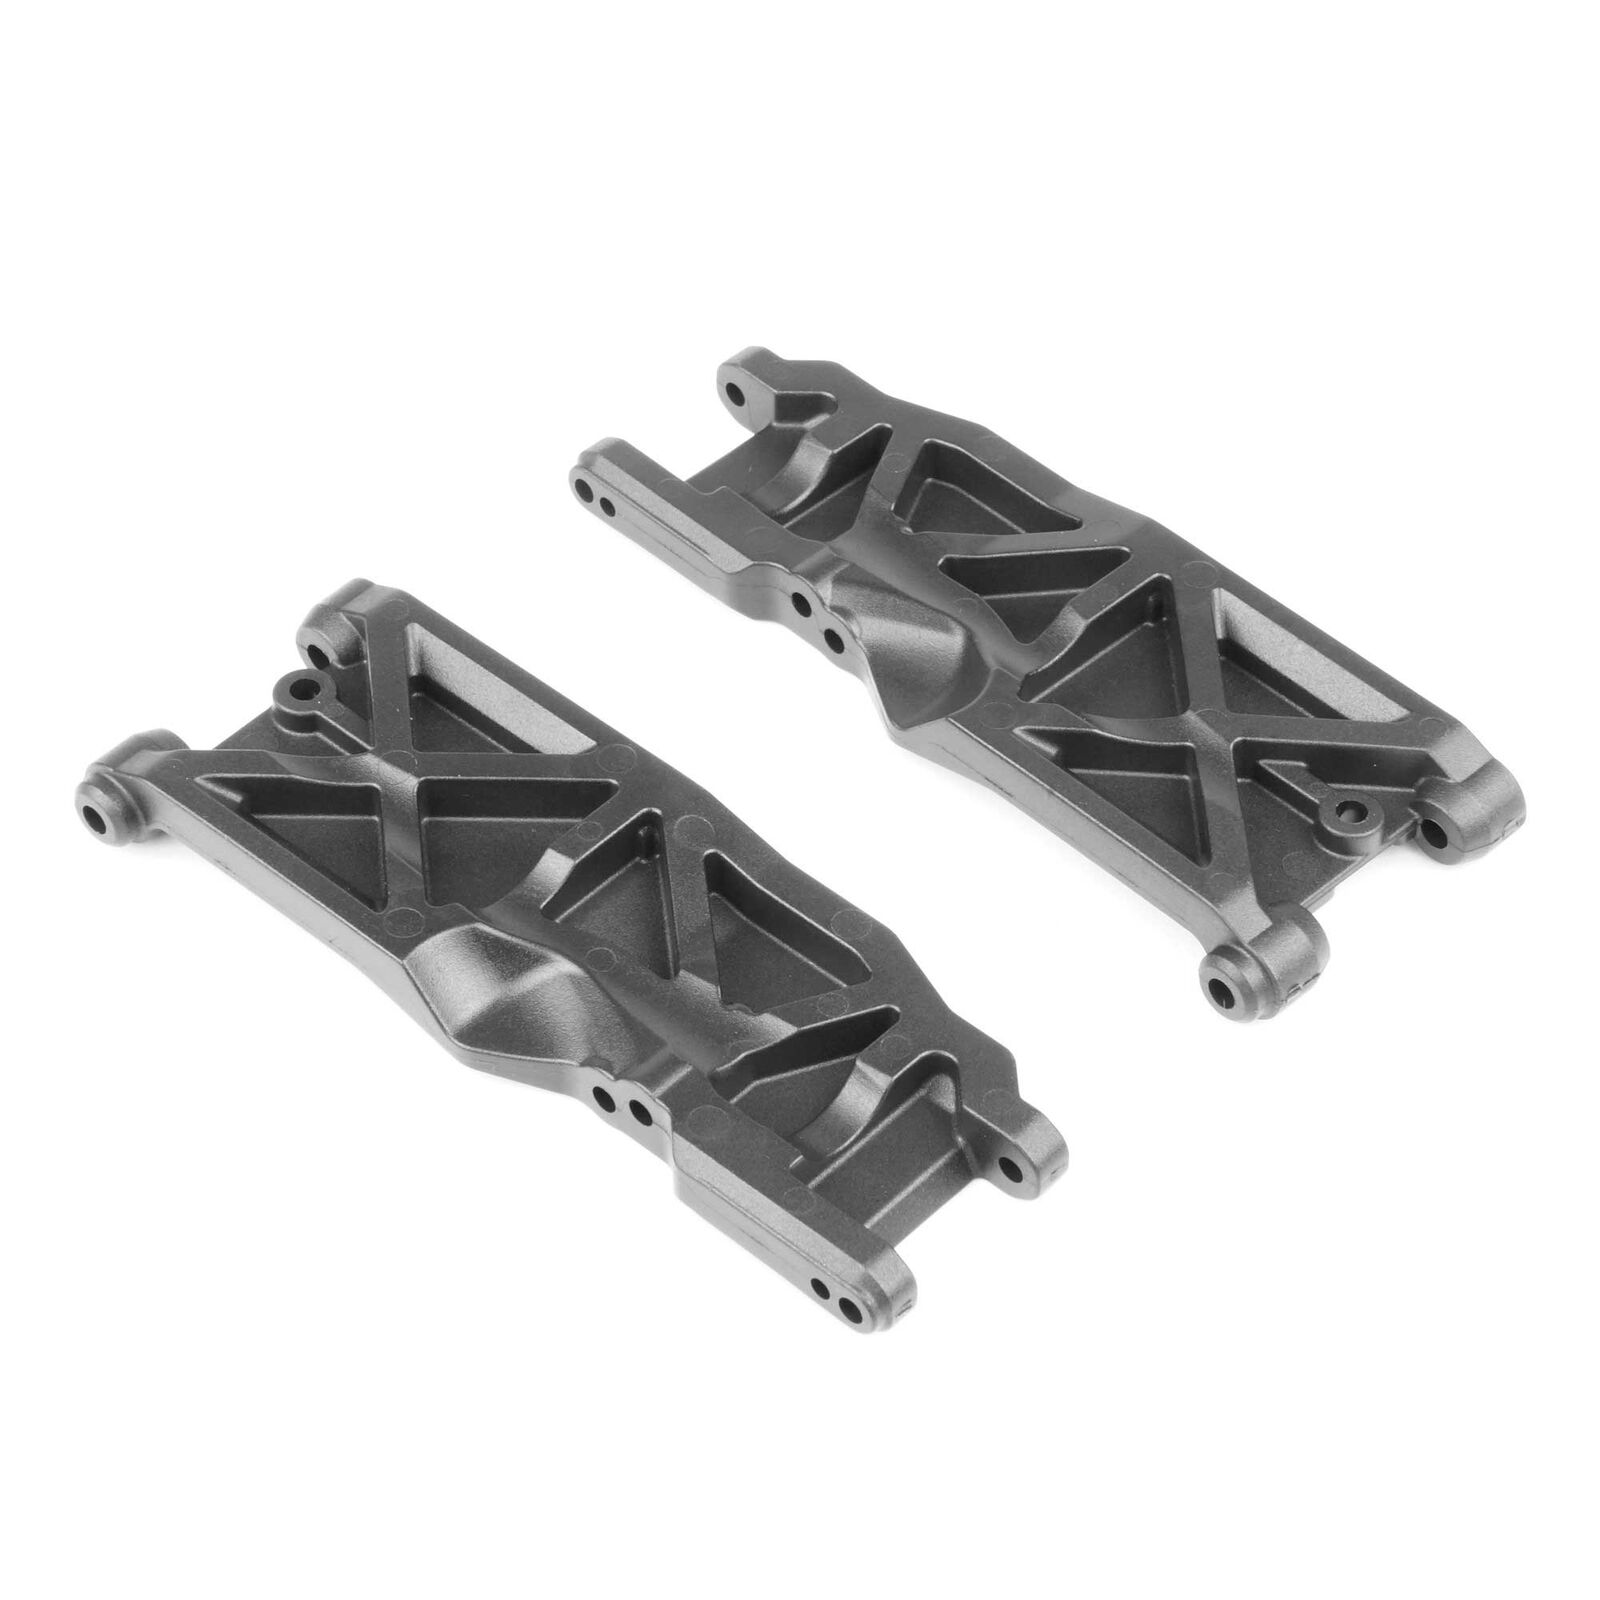 Rear Suspension Arms for 3.5mm 6523HD Pins: ET410